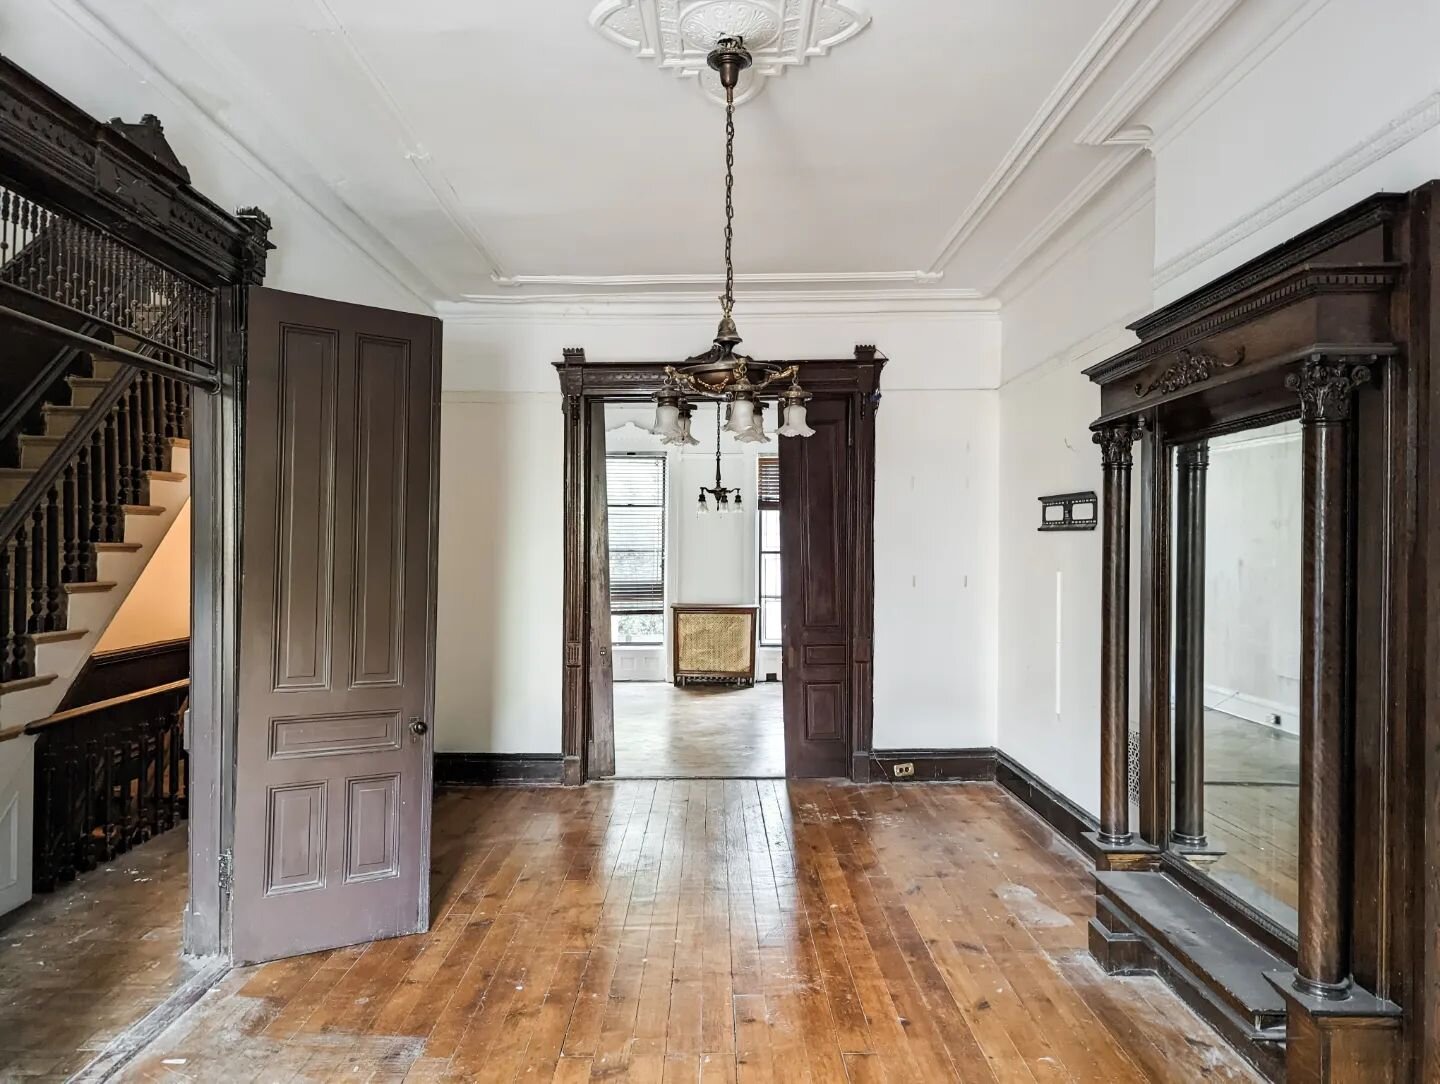 We've been dreaming of restoring this Brownstone Parlor to its original grandeur since we first stepped foot inside #theHalseyHouse. We're excited for demo to start down here this week! Oh and don't worry, we're keeping nearly all of the original det